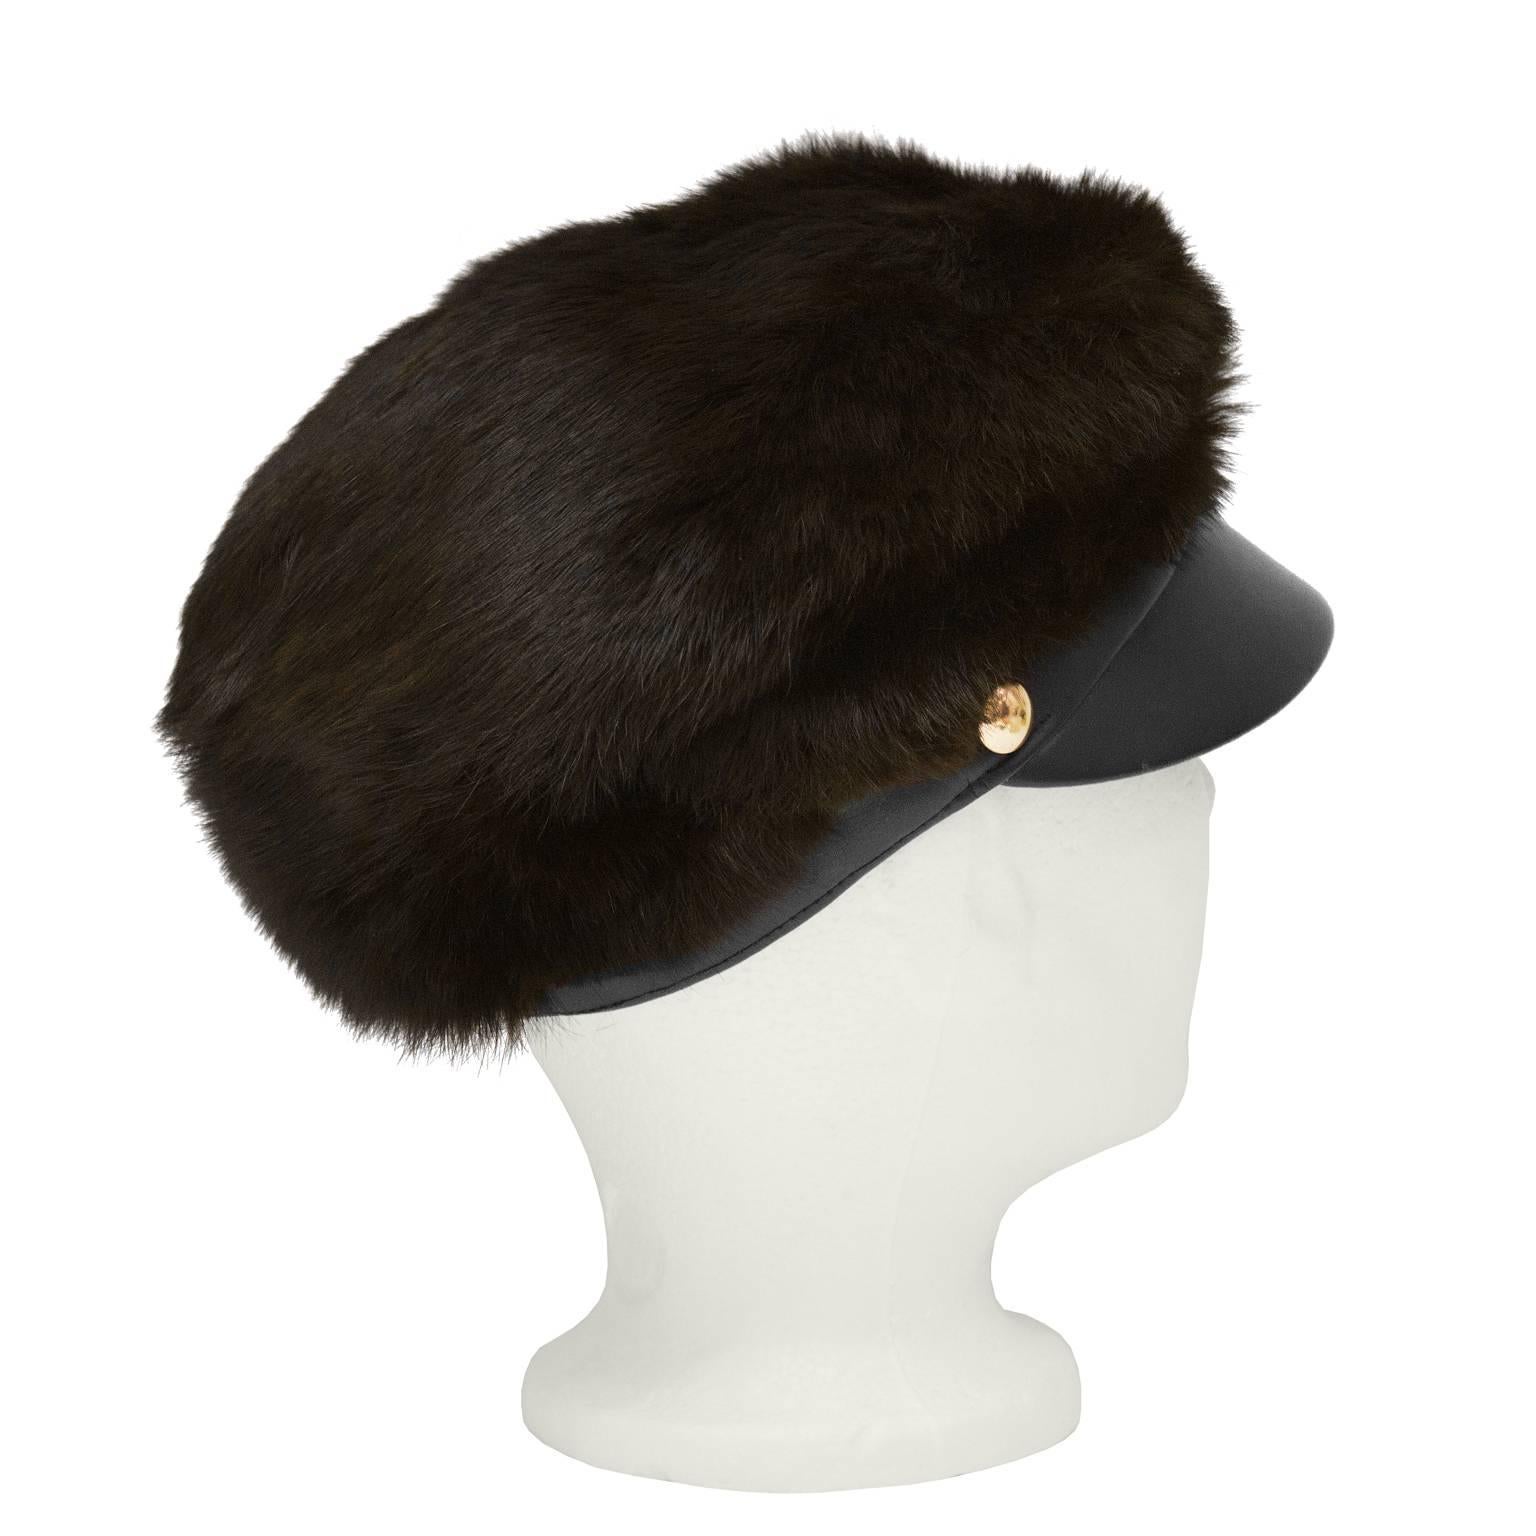 Madcaps for Bonwit Teller dark brown mink and black leather peaked brim cap from the 1960's. Mink body with black leather brim and trim. Gold hardware buttons on either side of the brim. In excellent condition, fits small. Lined in black satin.